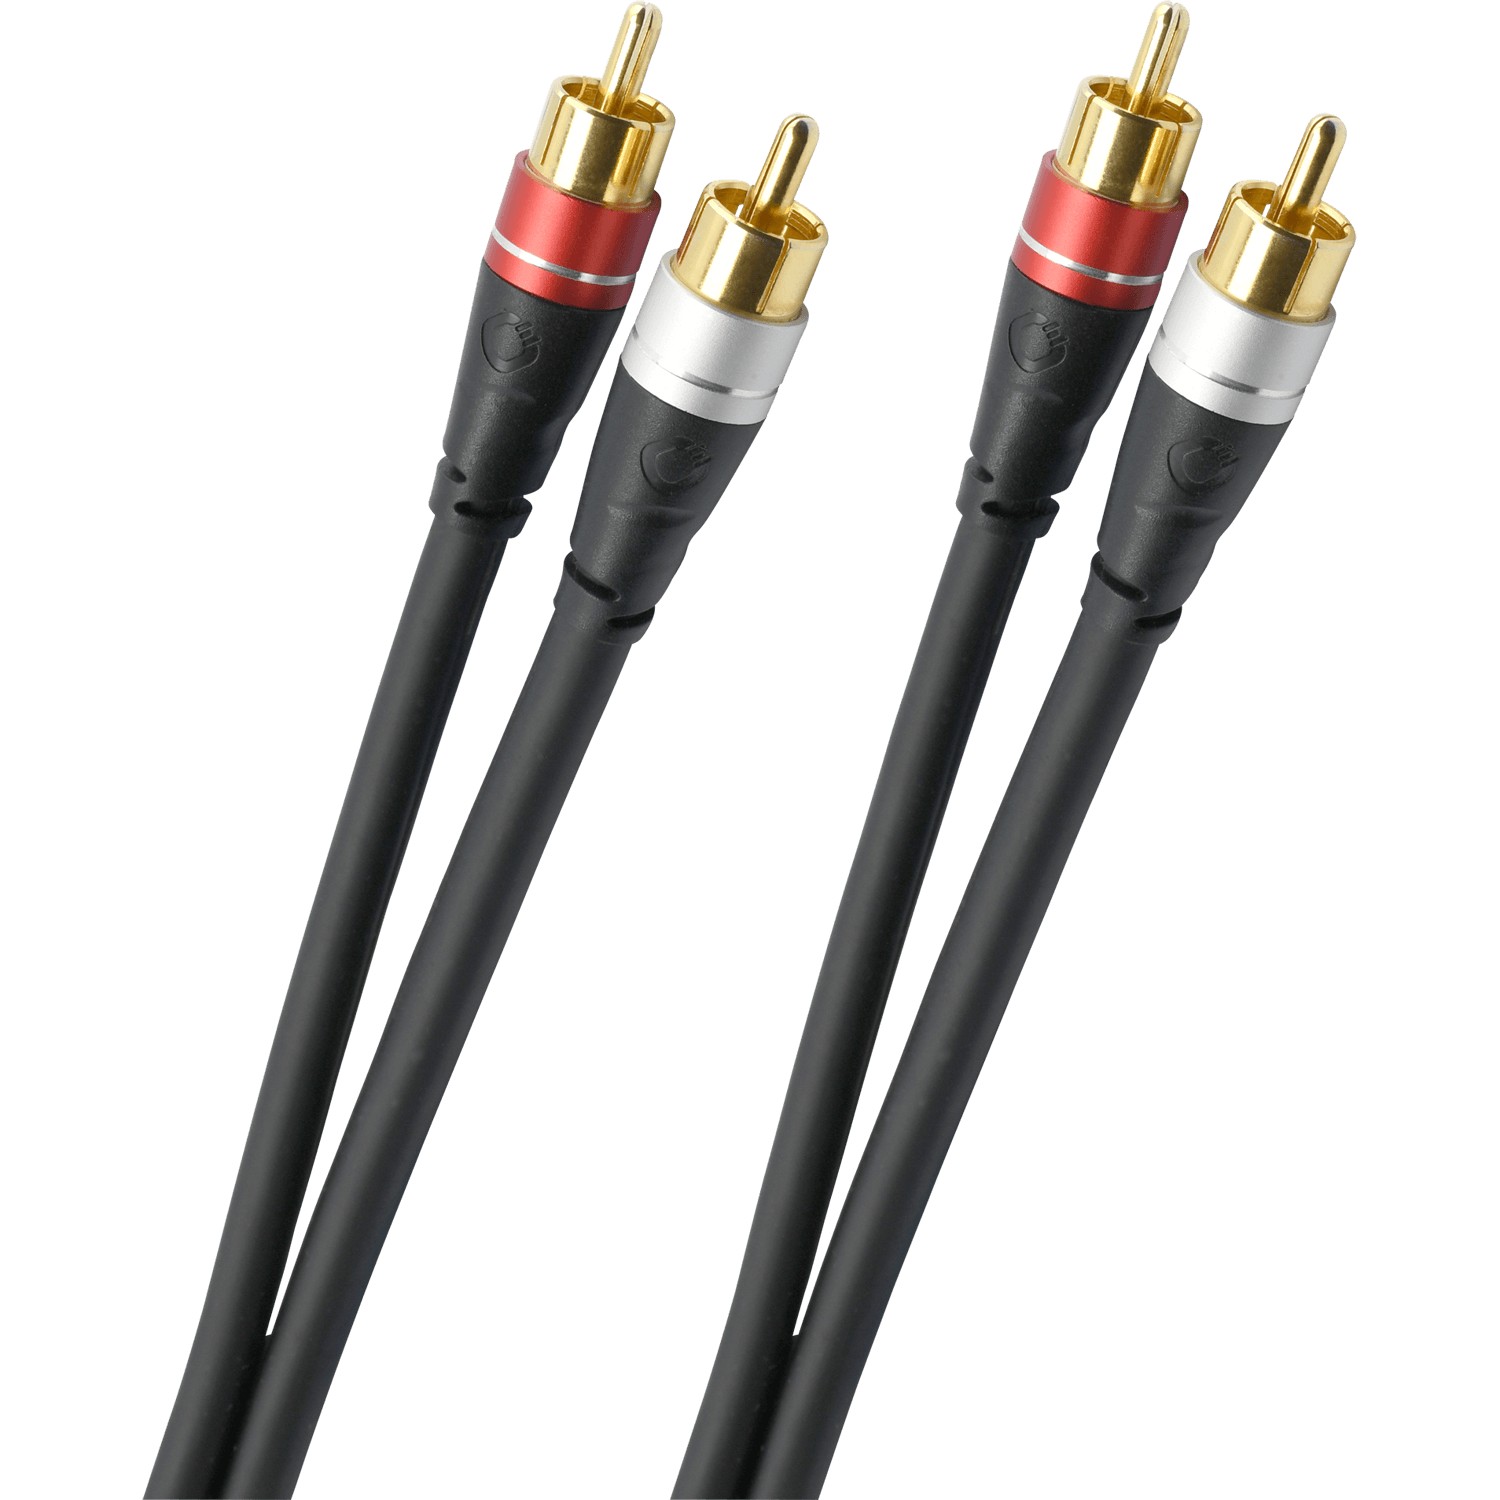 Кабели межблочные аудио Oehlbach EXCELLENCE Select Audio Link, Audio cable Cinch, 1.5m bw (D1C33143) кабели межблочные аудио silent wire serie 4 mk3 optical cable 5m